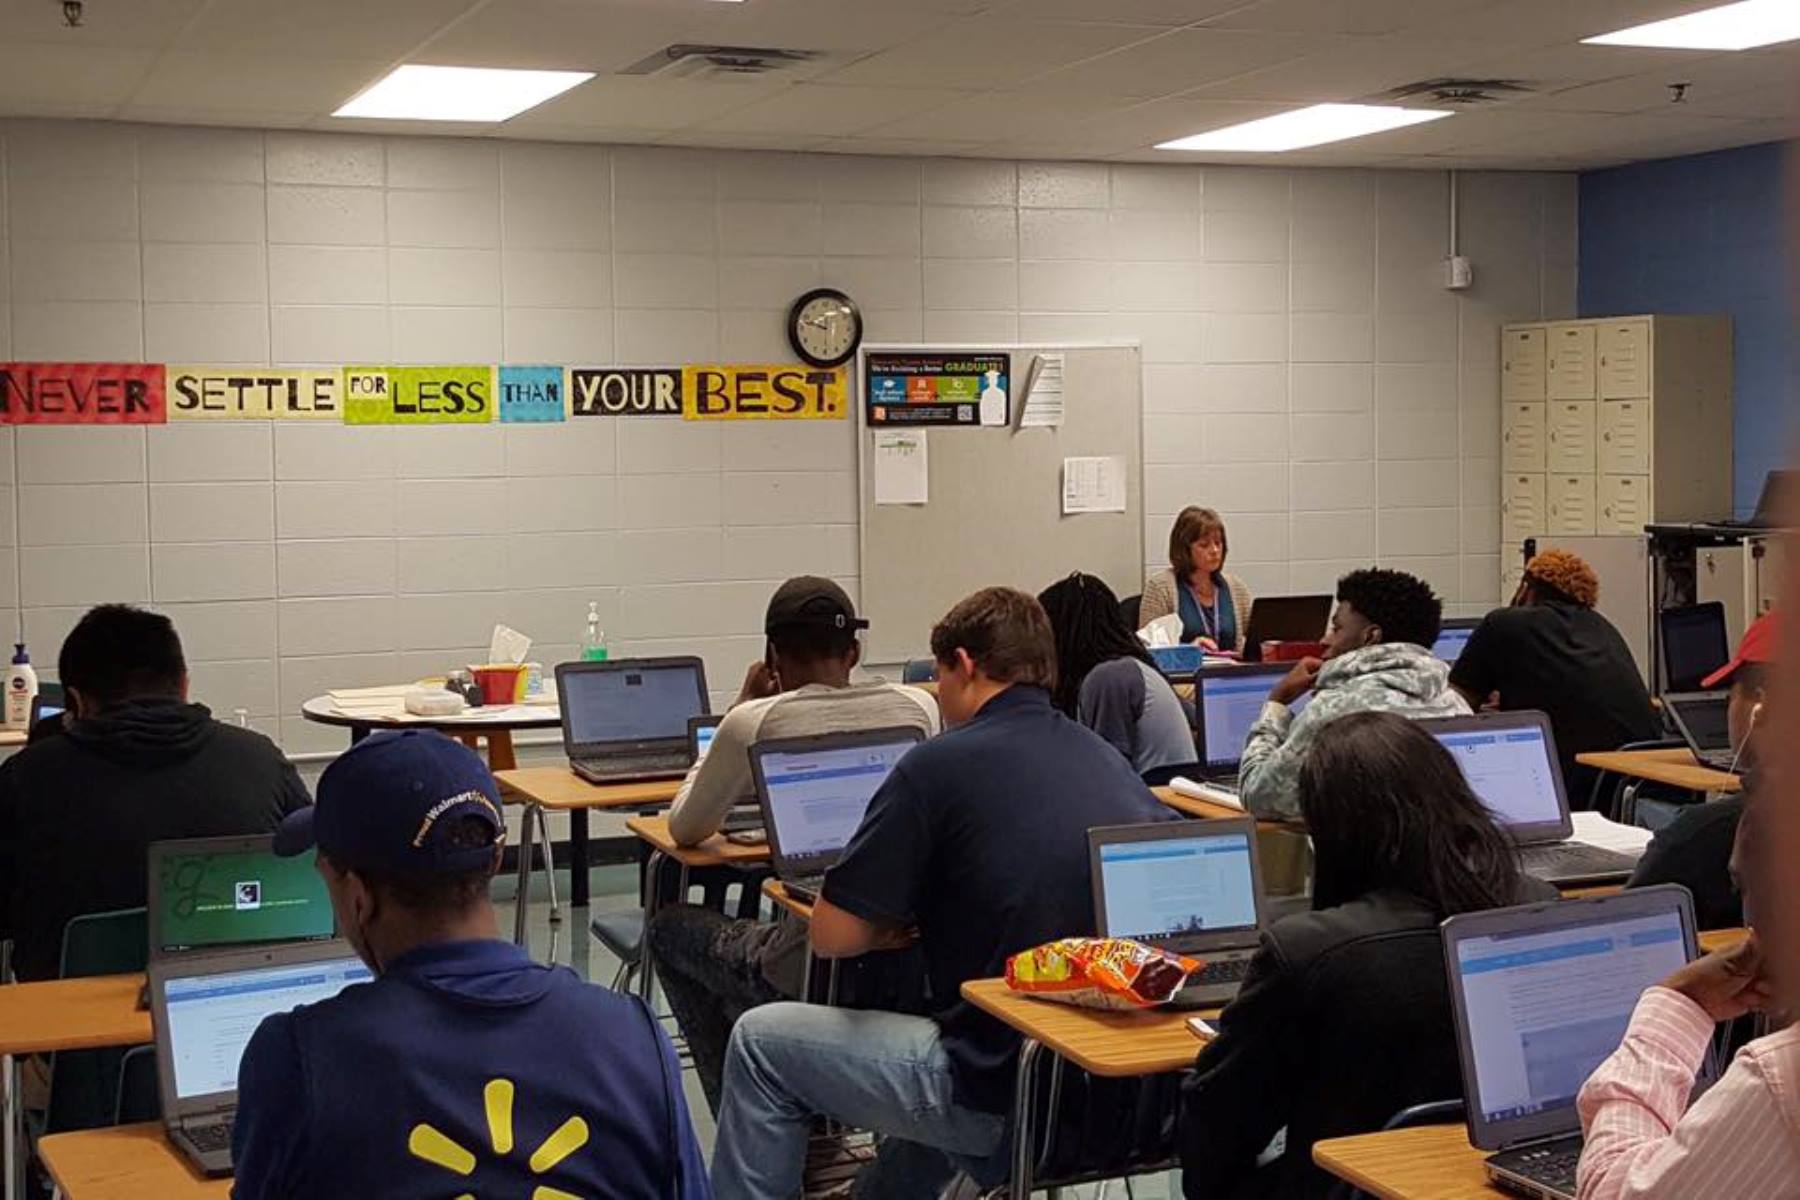 High School students in a classroom, each with a laptop computer on their desks